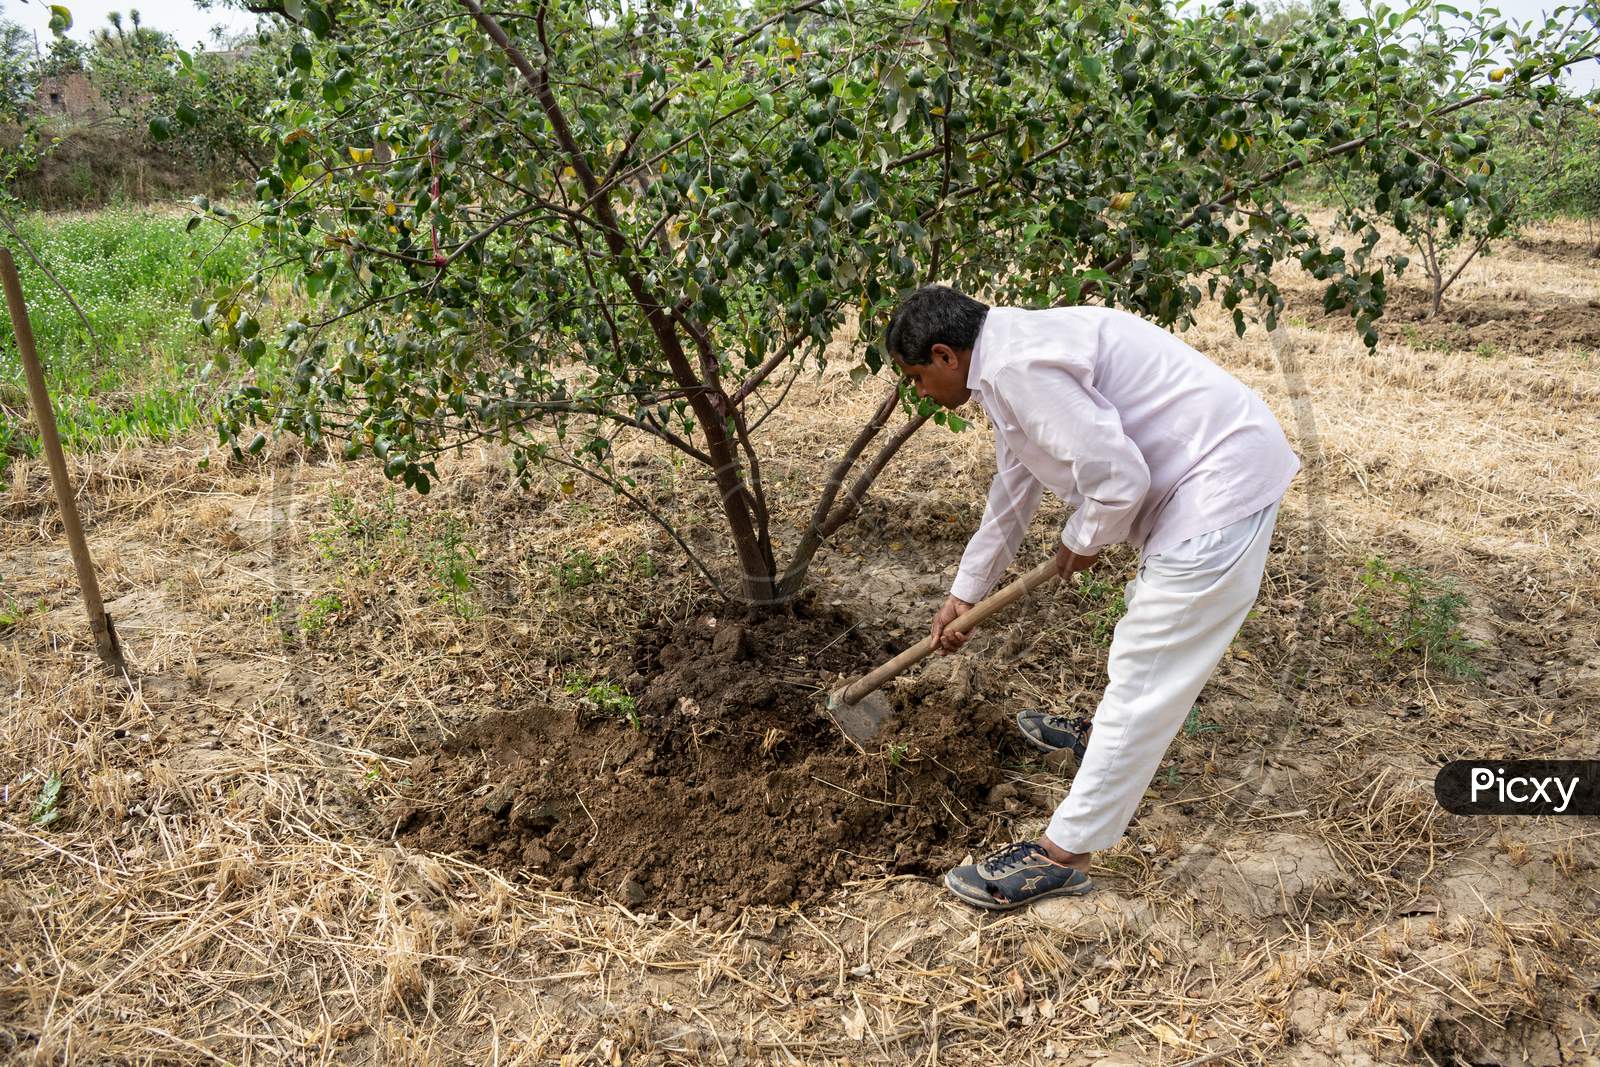 Preparation of pits around plum trees for watering and hoeing or gudai around the trees by farmer using spade